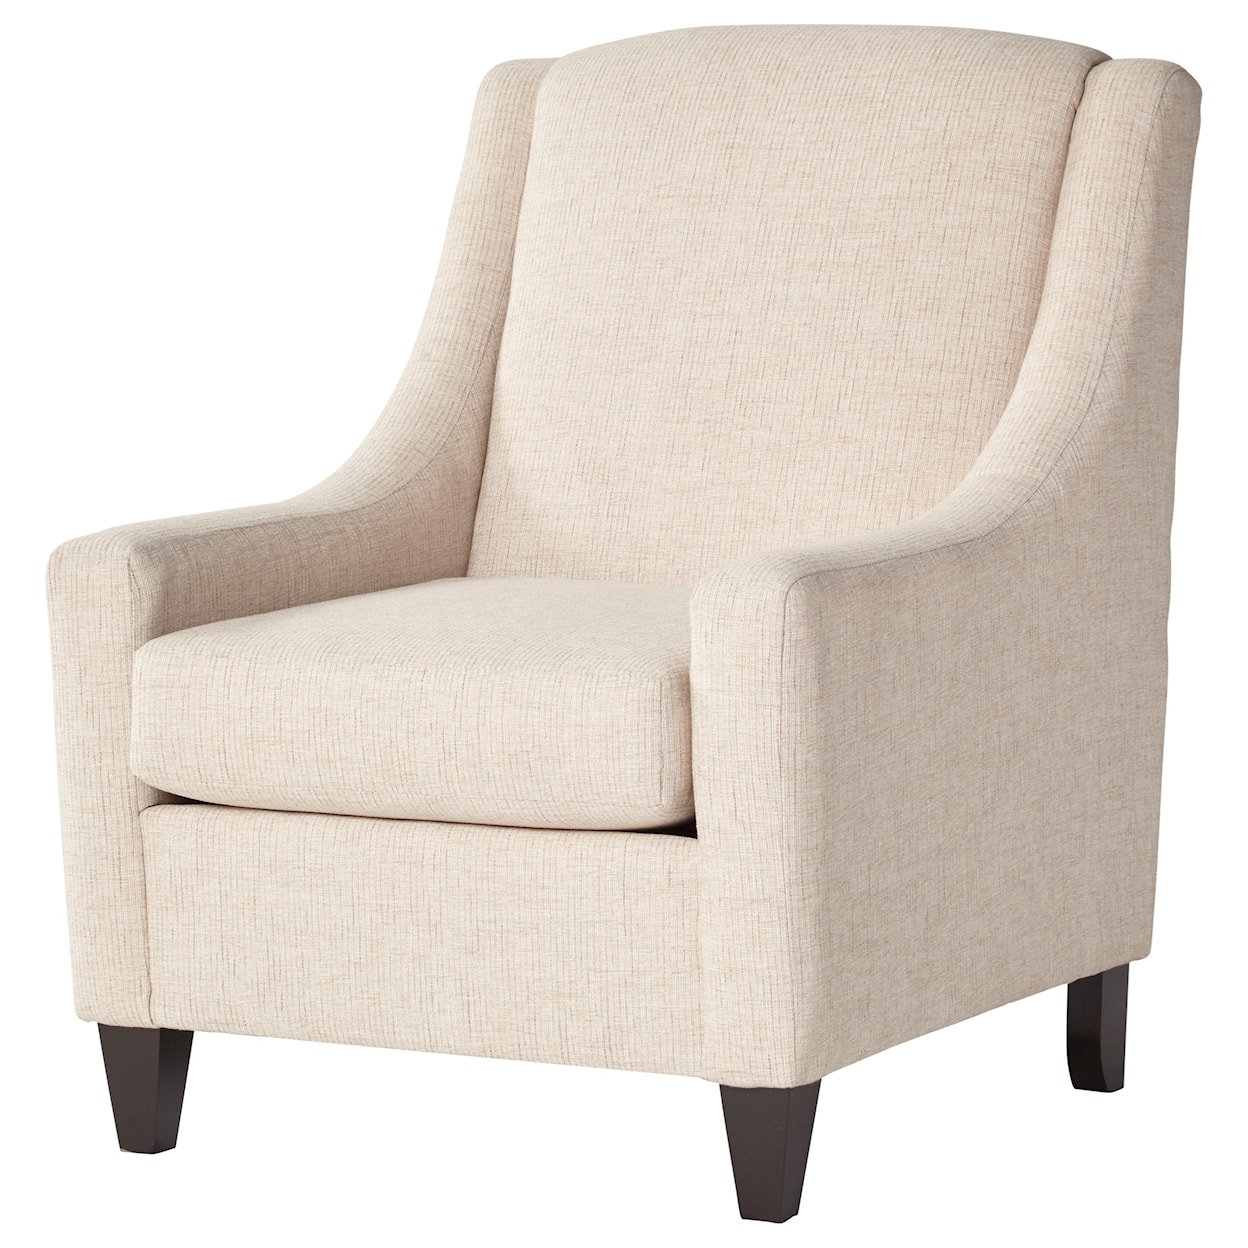 Serta Upholstery by Hughes Furniture 1500 Occasional Chair